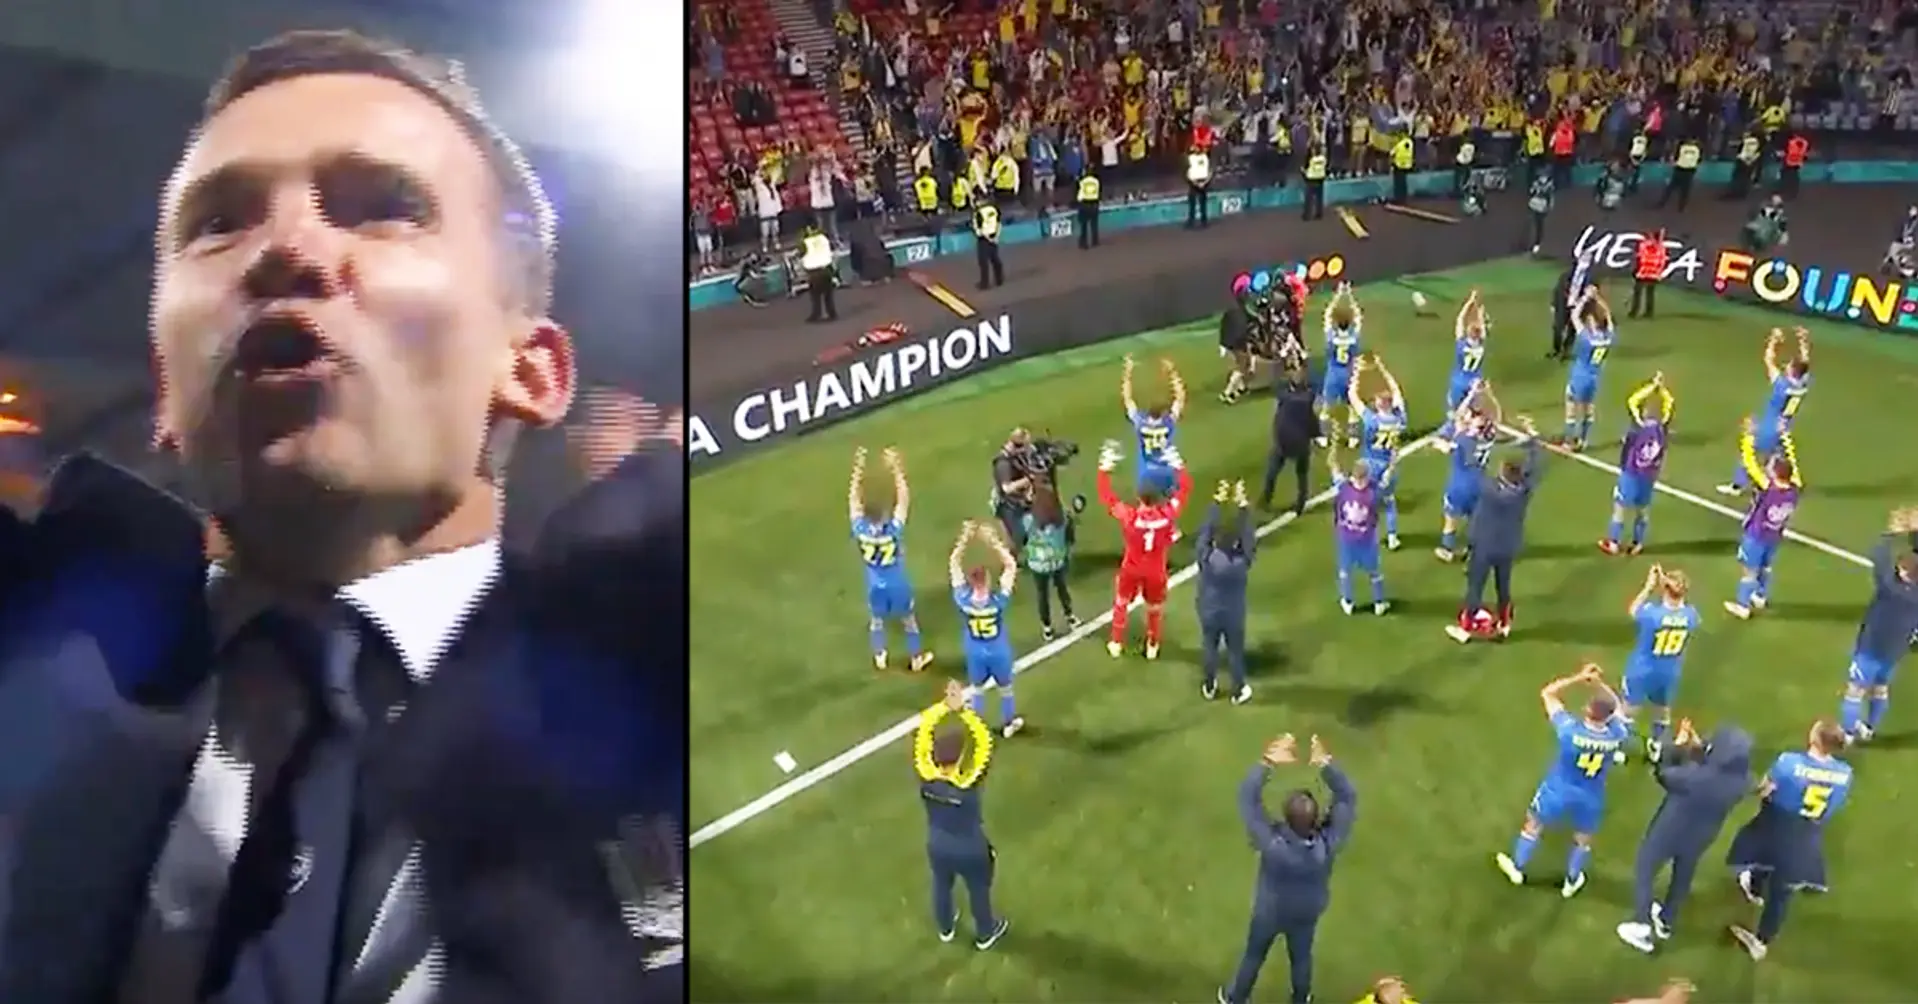 Amazing scenes: Andriy Shevchenko and Ukraine players celebrate their win with fans